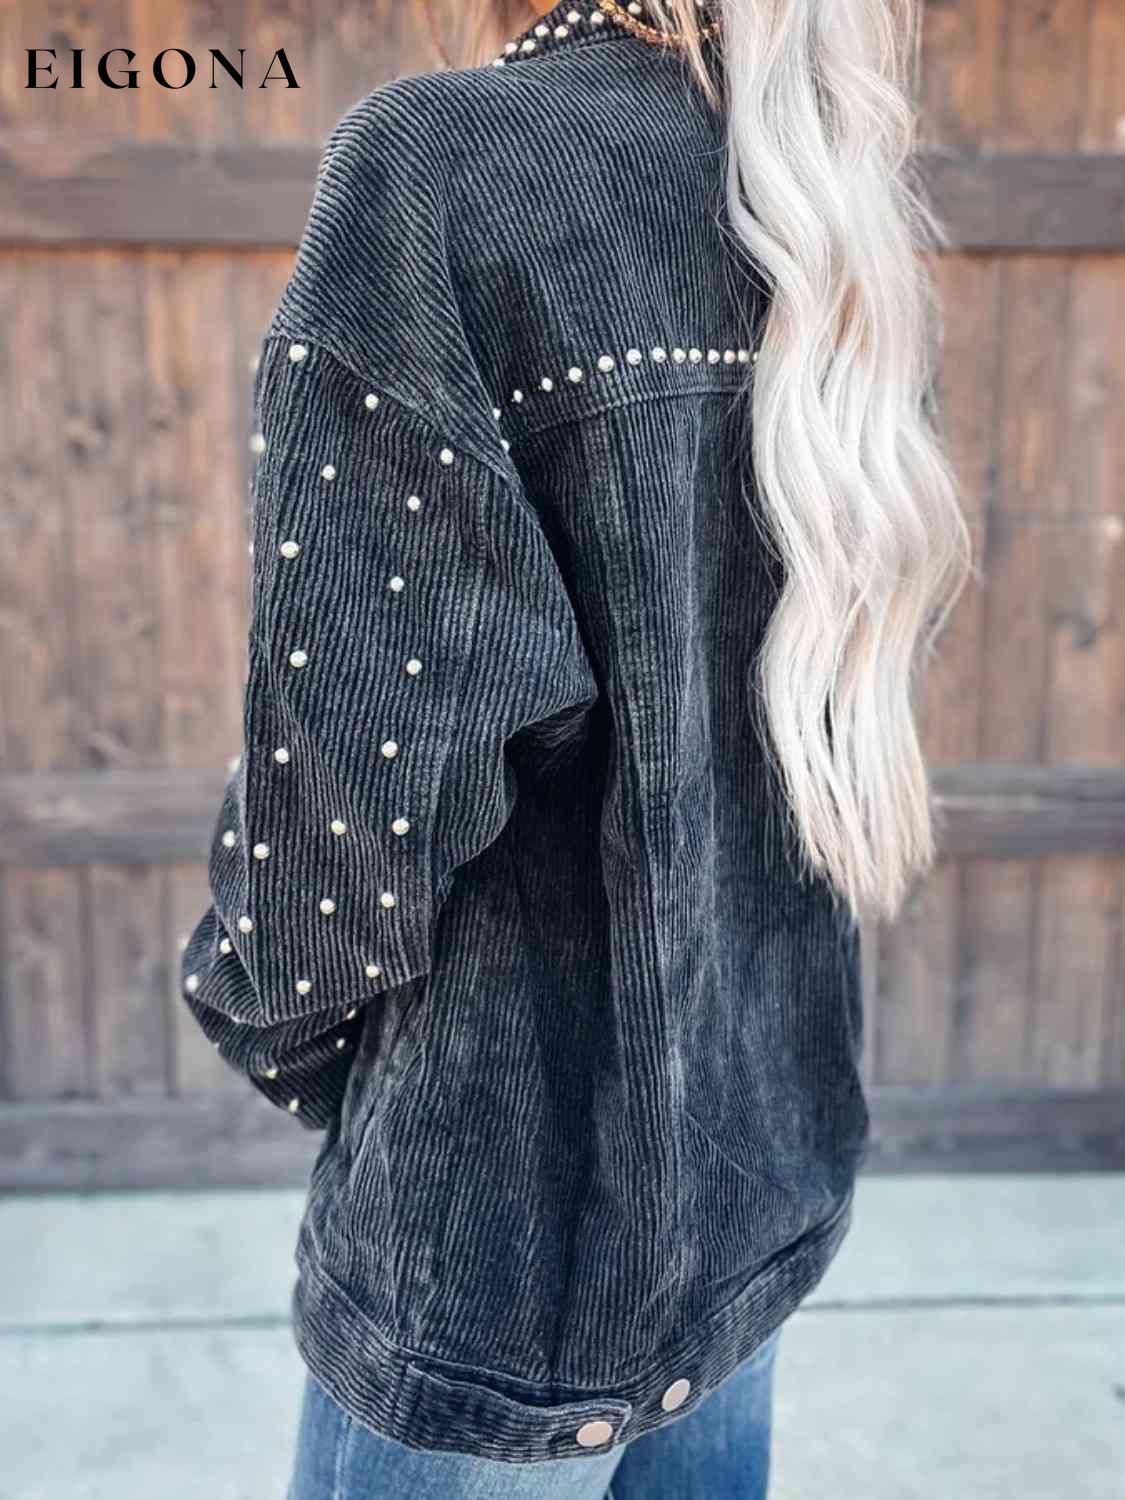 Studded Collared Neck Button Down Jacket C@X@Y clothes Jackets & Coats Ship From Overseas